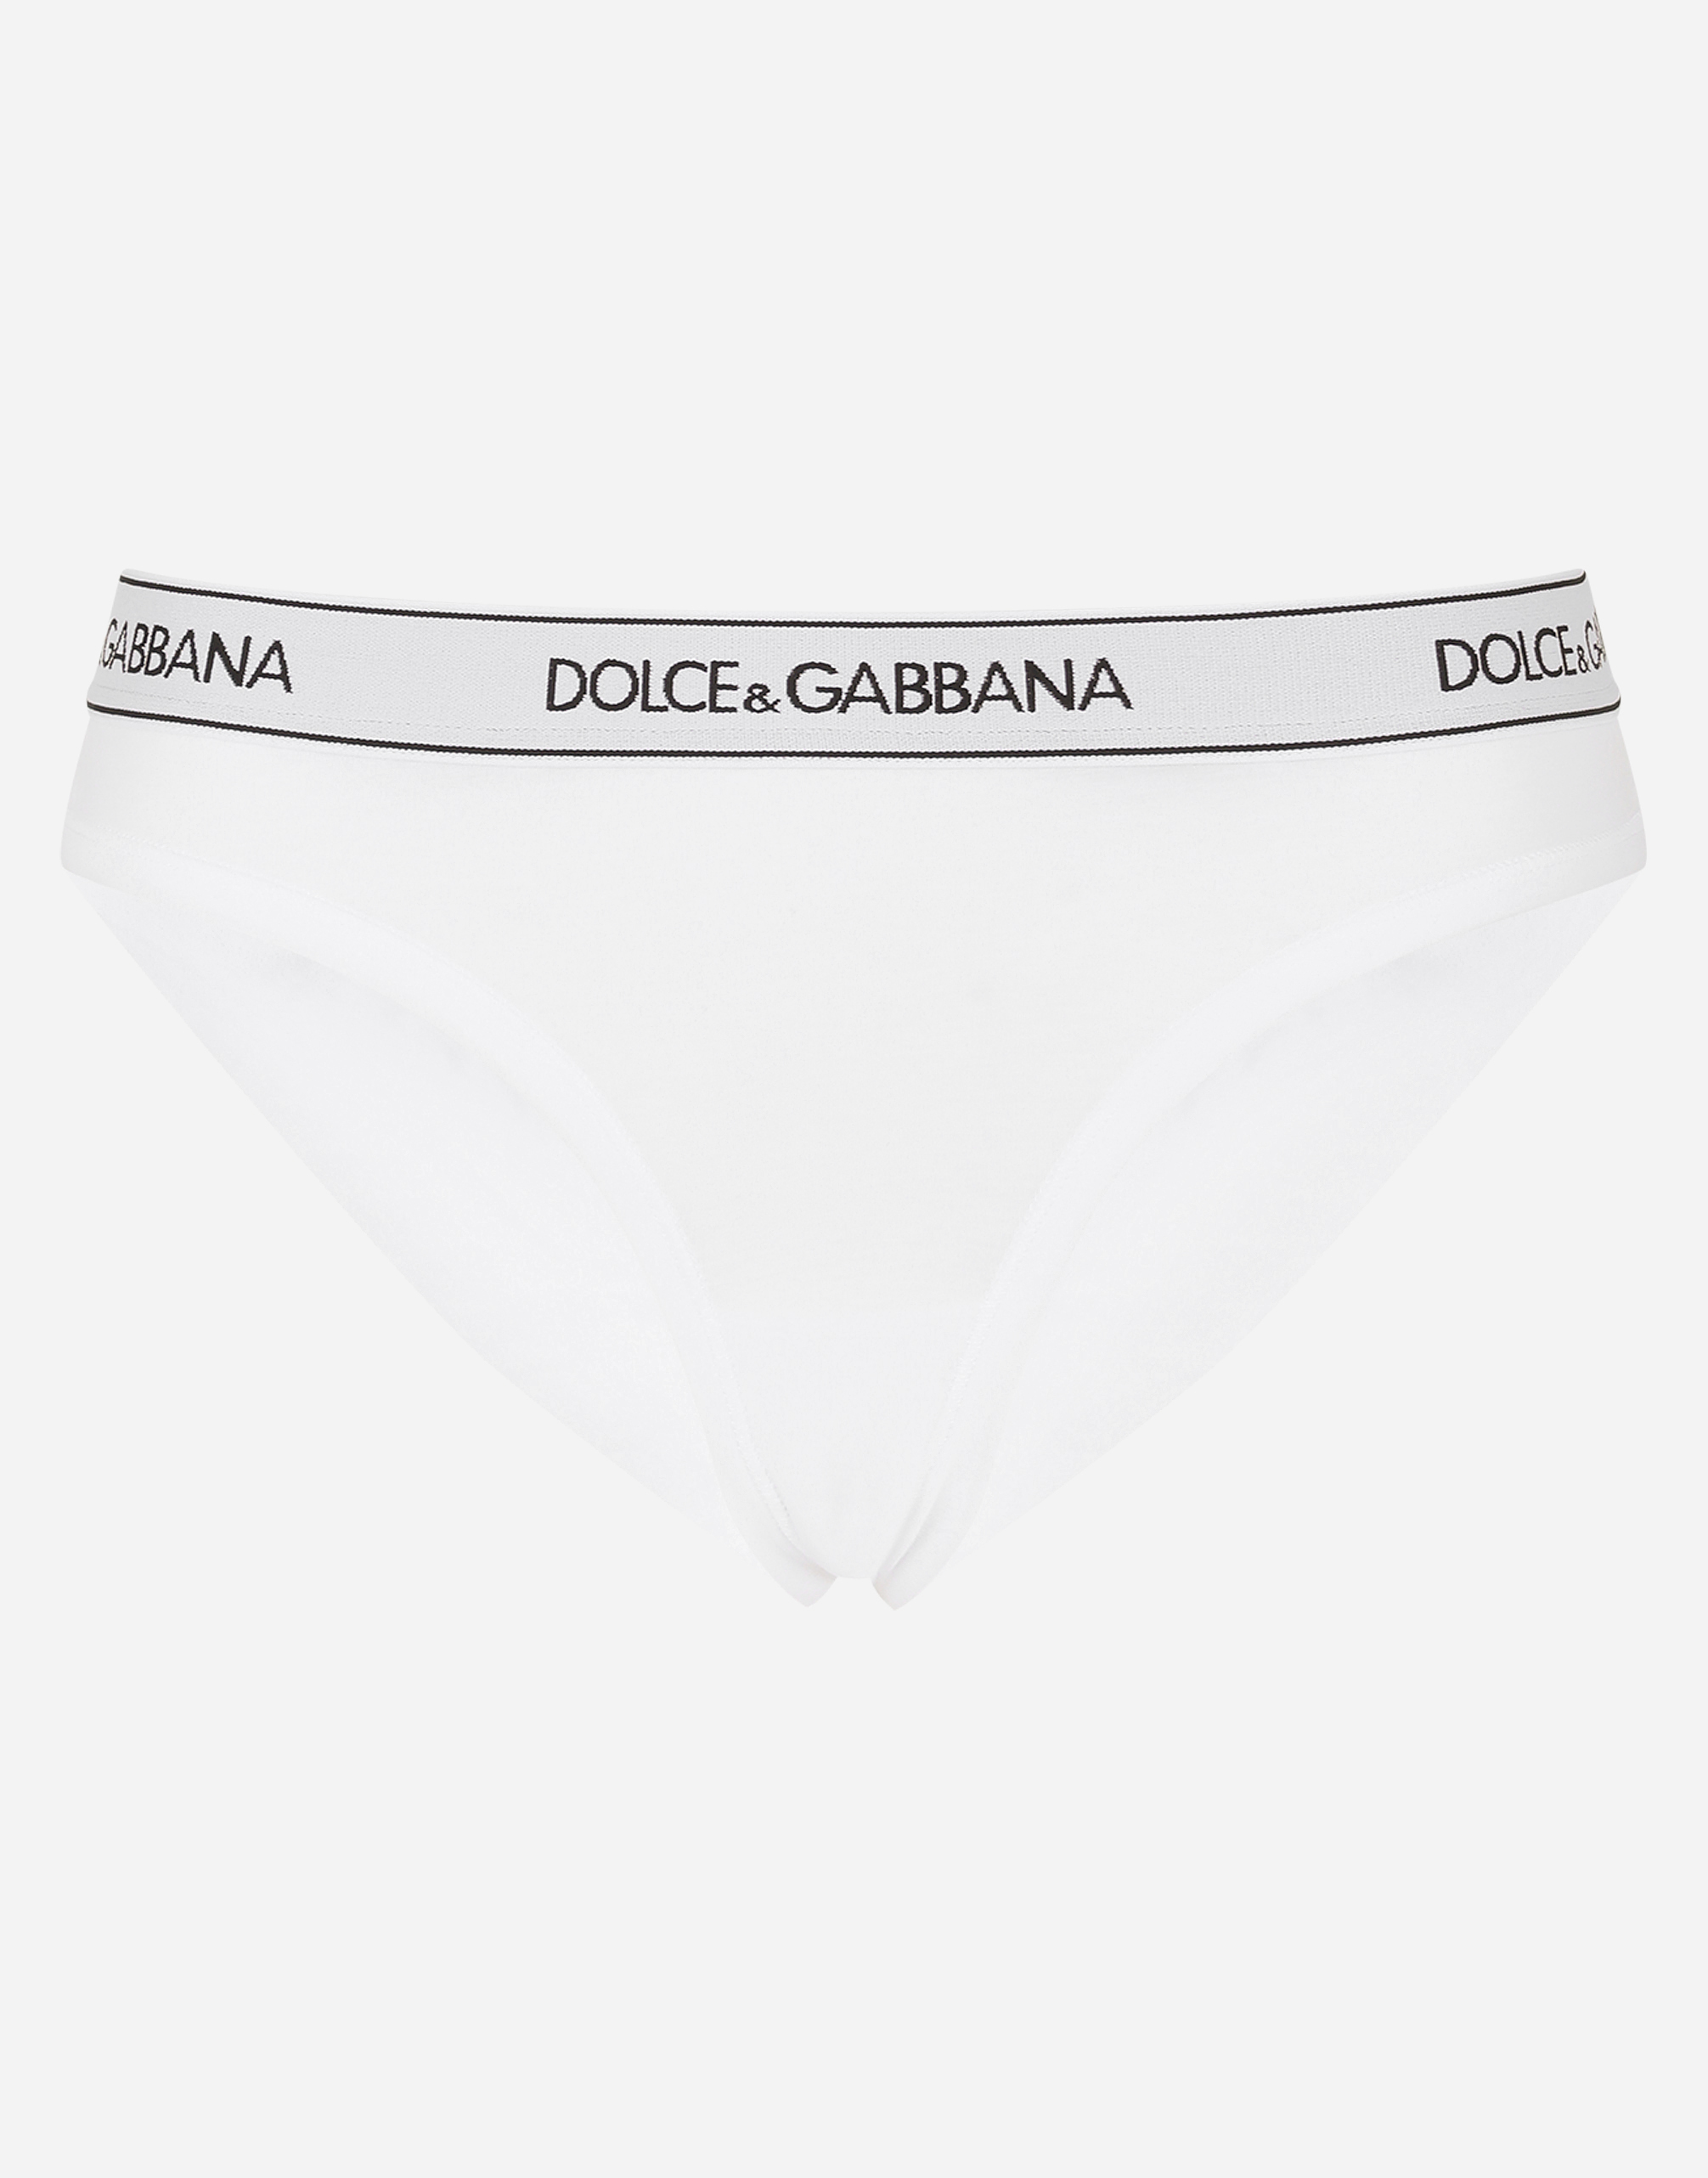 DOLCE & GABBANA JERSEY BRIEFS WITH BRANDED BAND